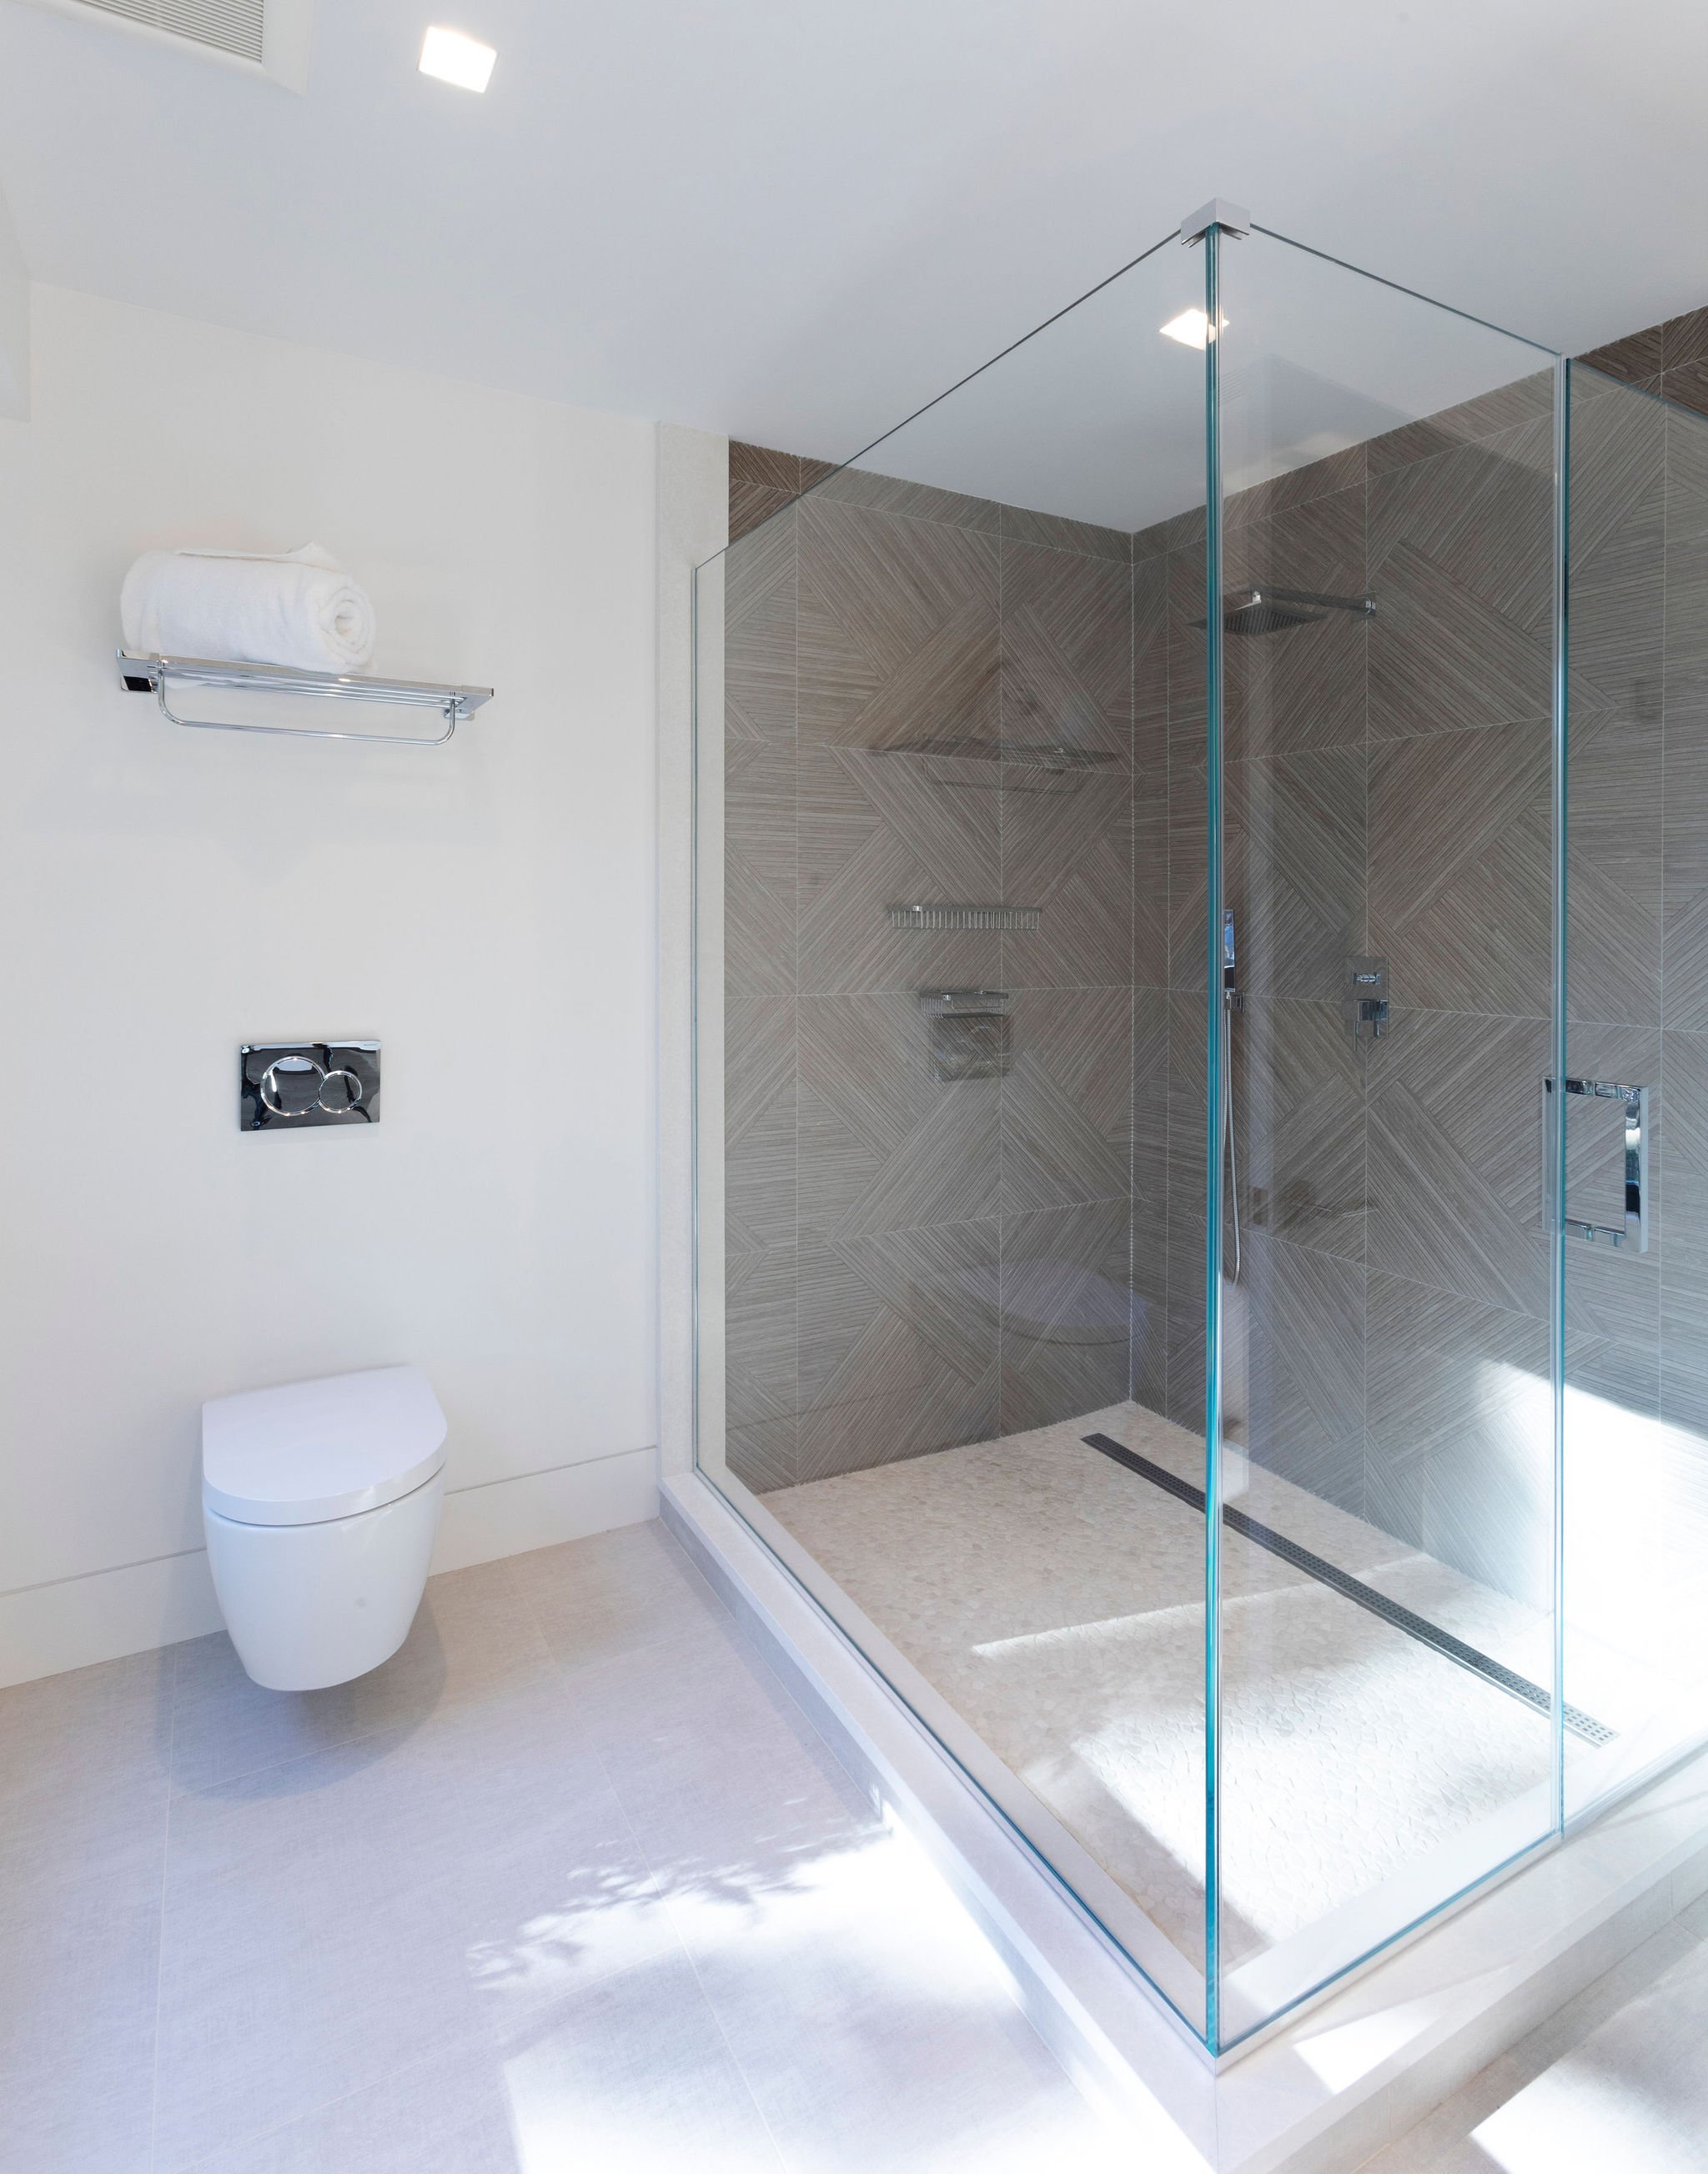  The shower walls are clad with a two dimensional tile that fit together like a puzzle. 